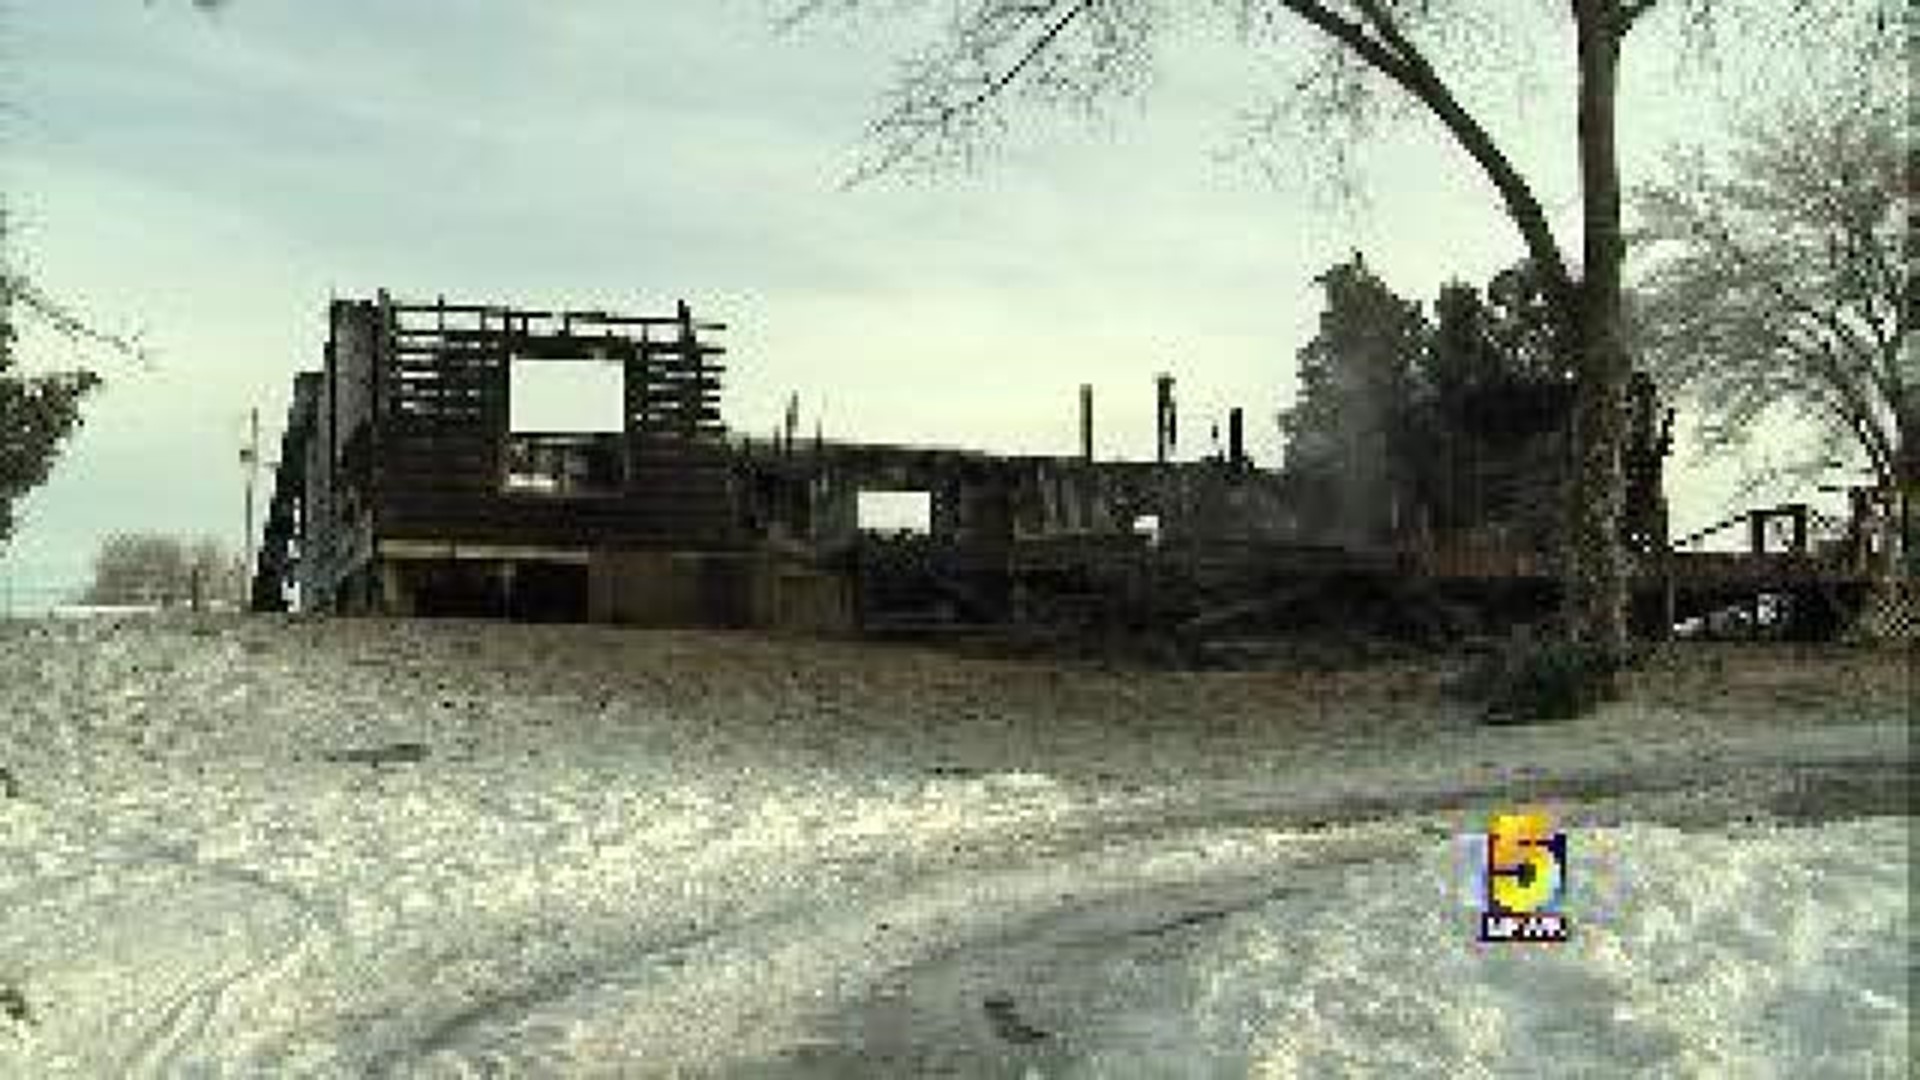 Crawford County Home Destroyed in Fire